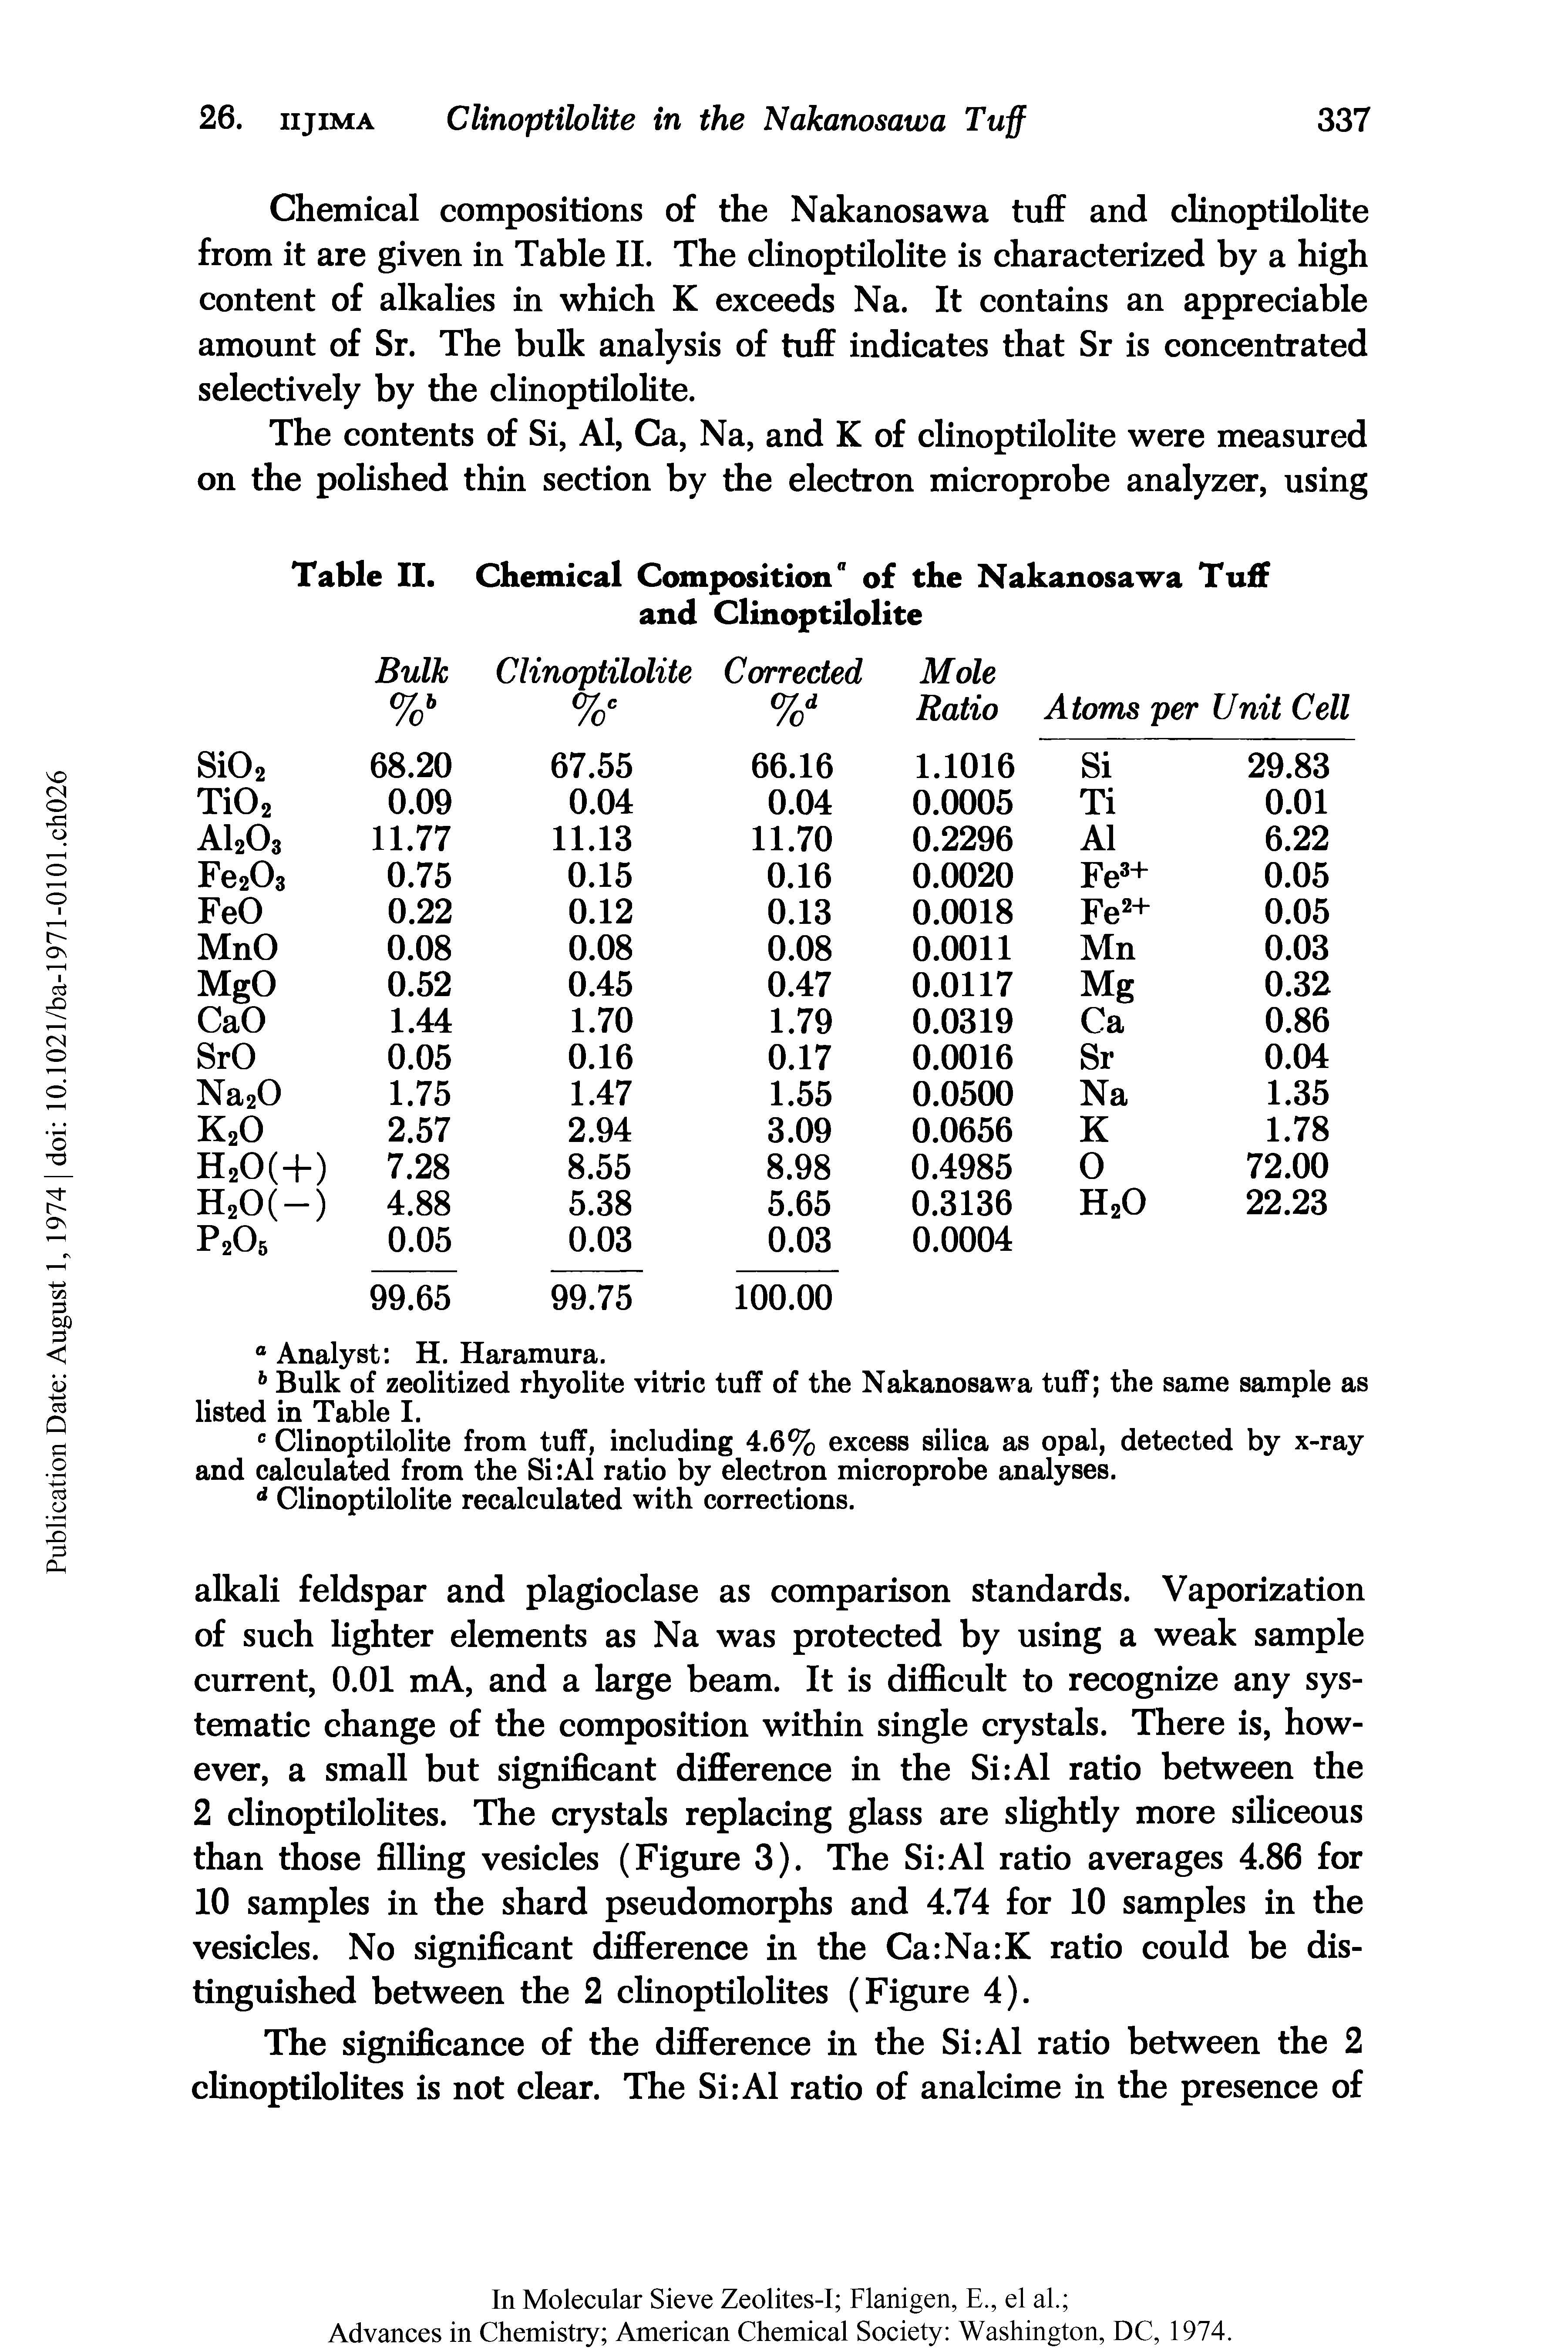 Table II. Chemical Composition 1 of the Nakanosawa Tuff and Clinoptilolite...